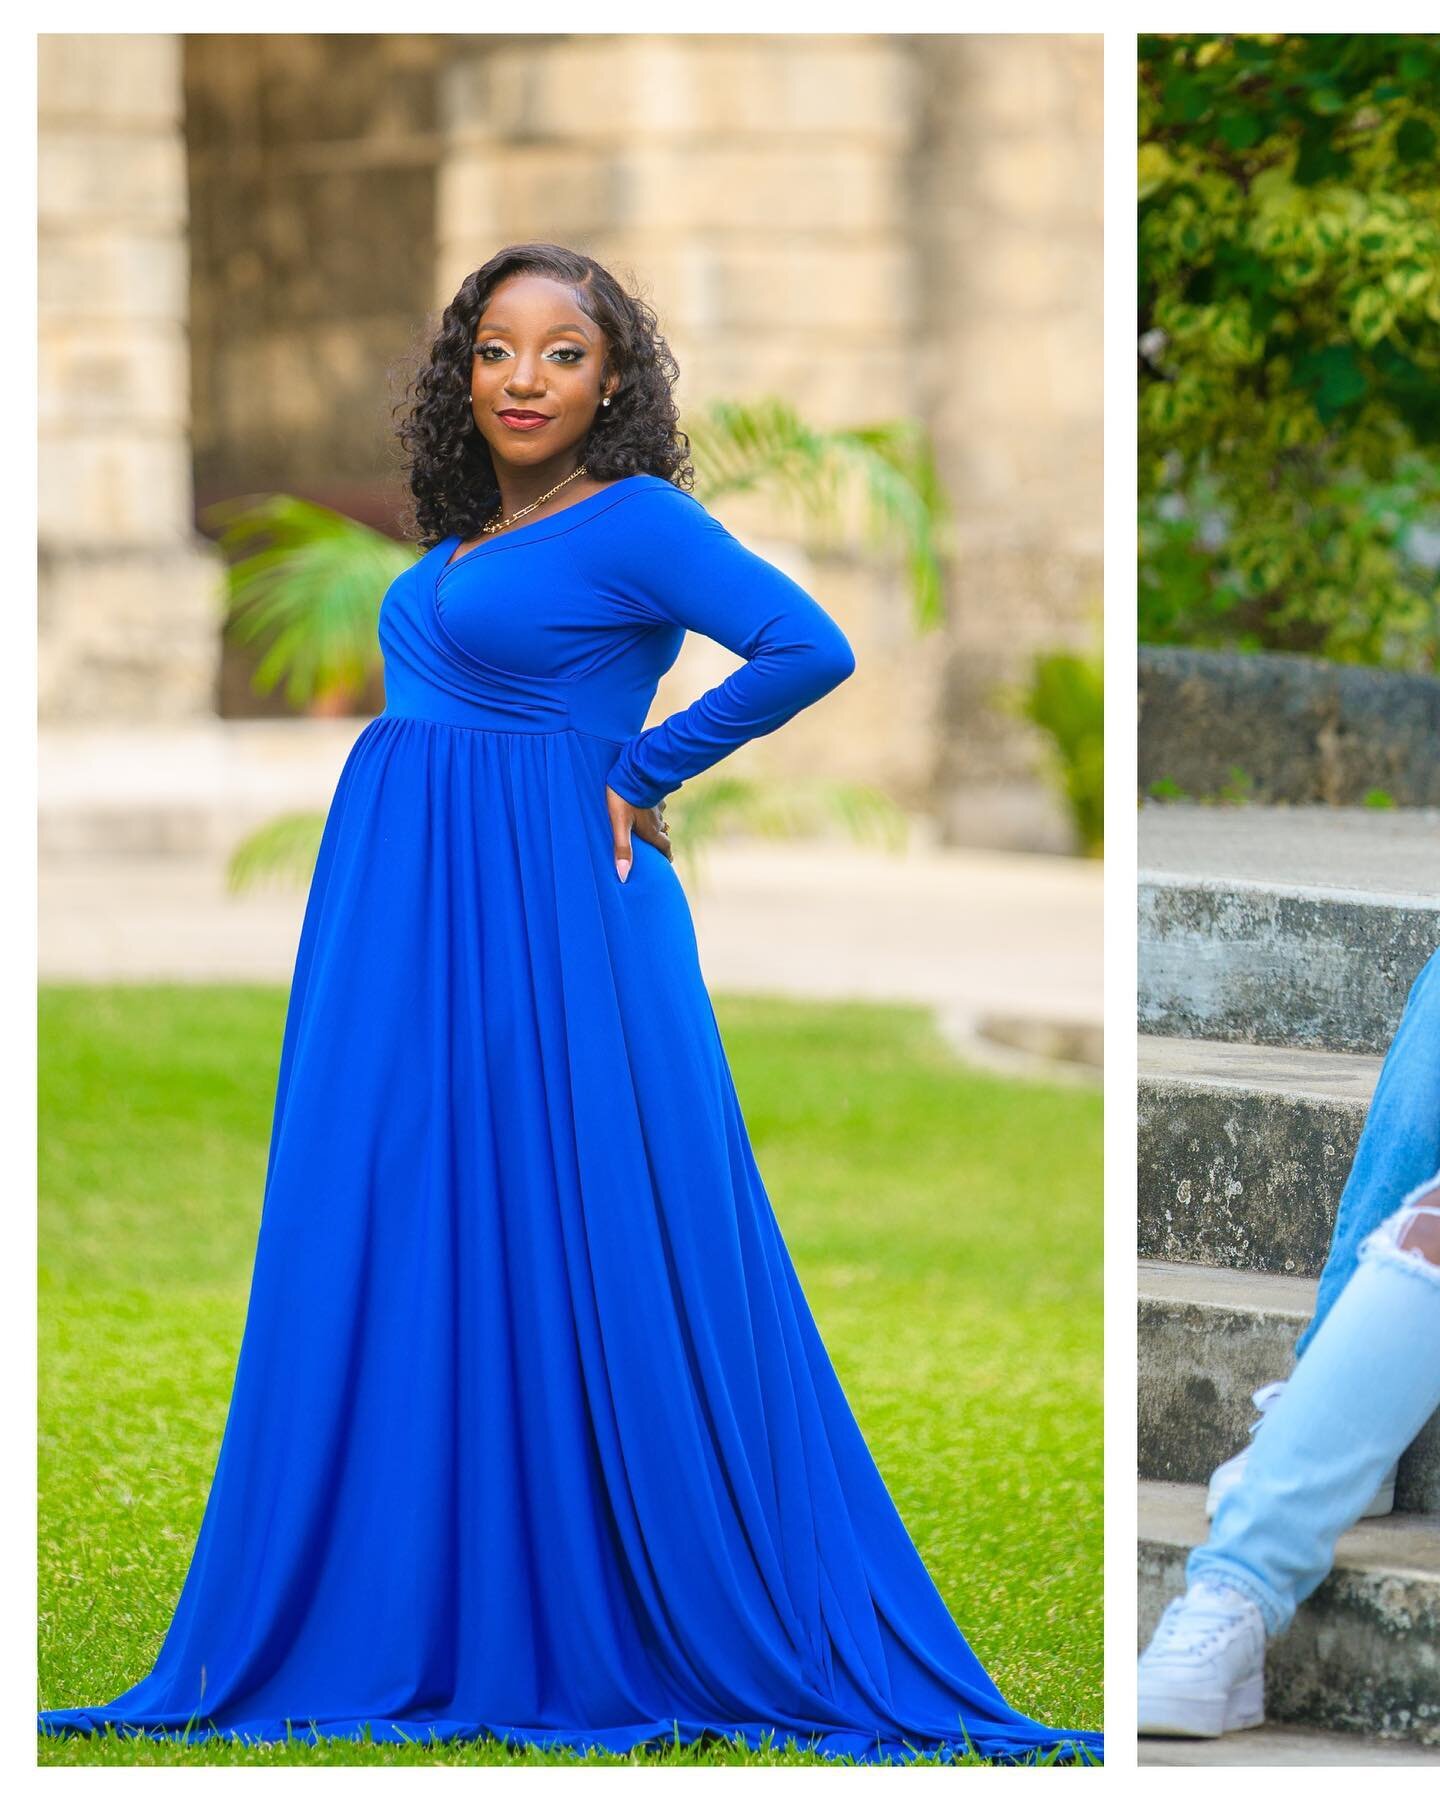 Team blue, all the way!

#maternityphotography 
#barbadosphotographer